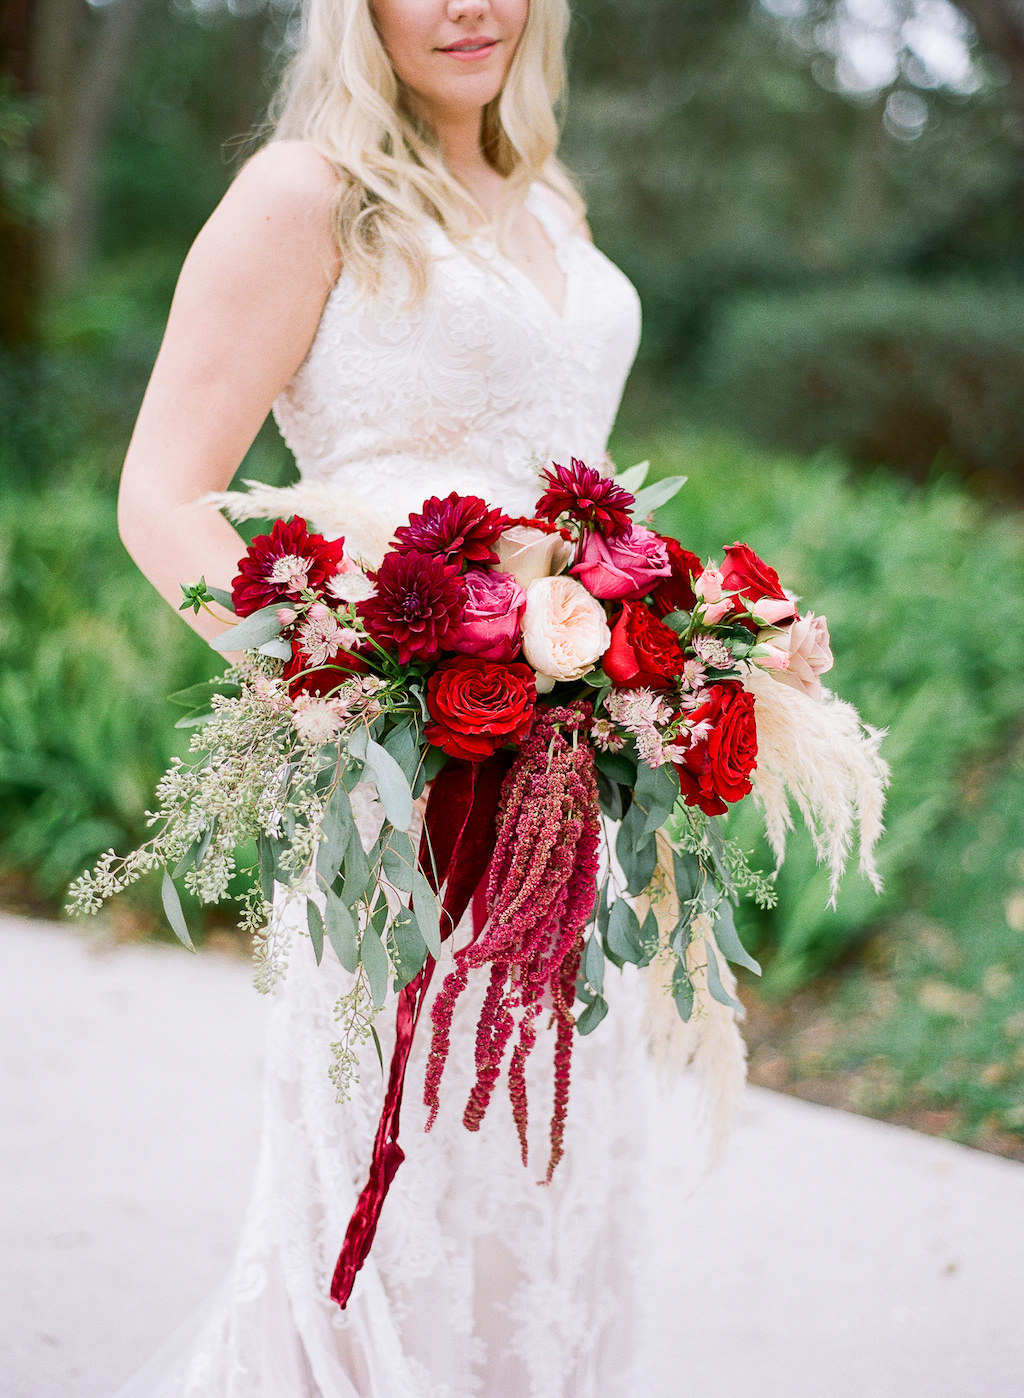 Florida Bride Wedding Portrait in Fitted Lace Wedding Dress with Tank Top Straps and Red, Pink, Ivory and Greenery Floral Bouquet | Tampa Bay Bridal Shop Nikki's Glitz and Glam Bridal Boutique